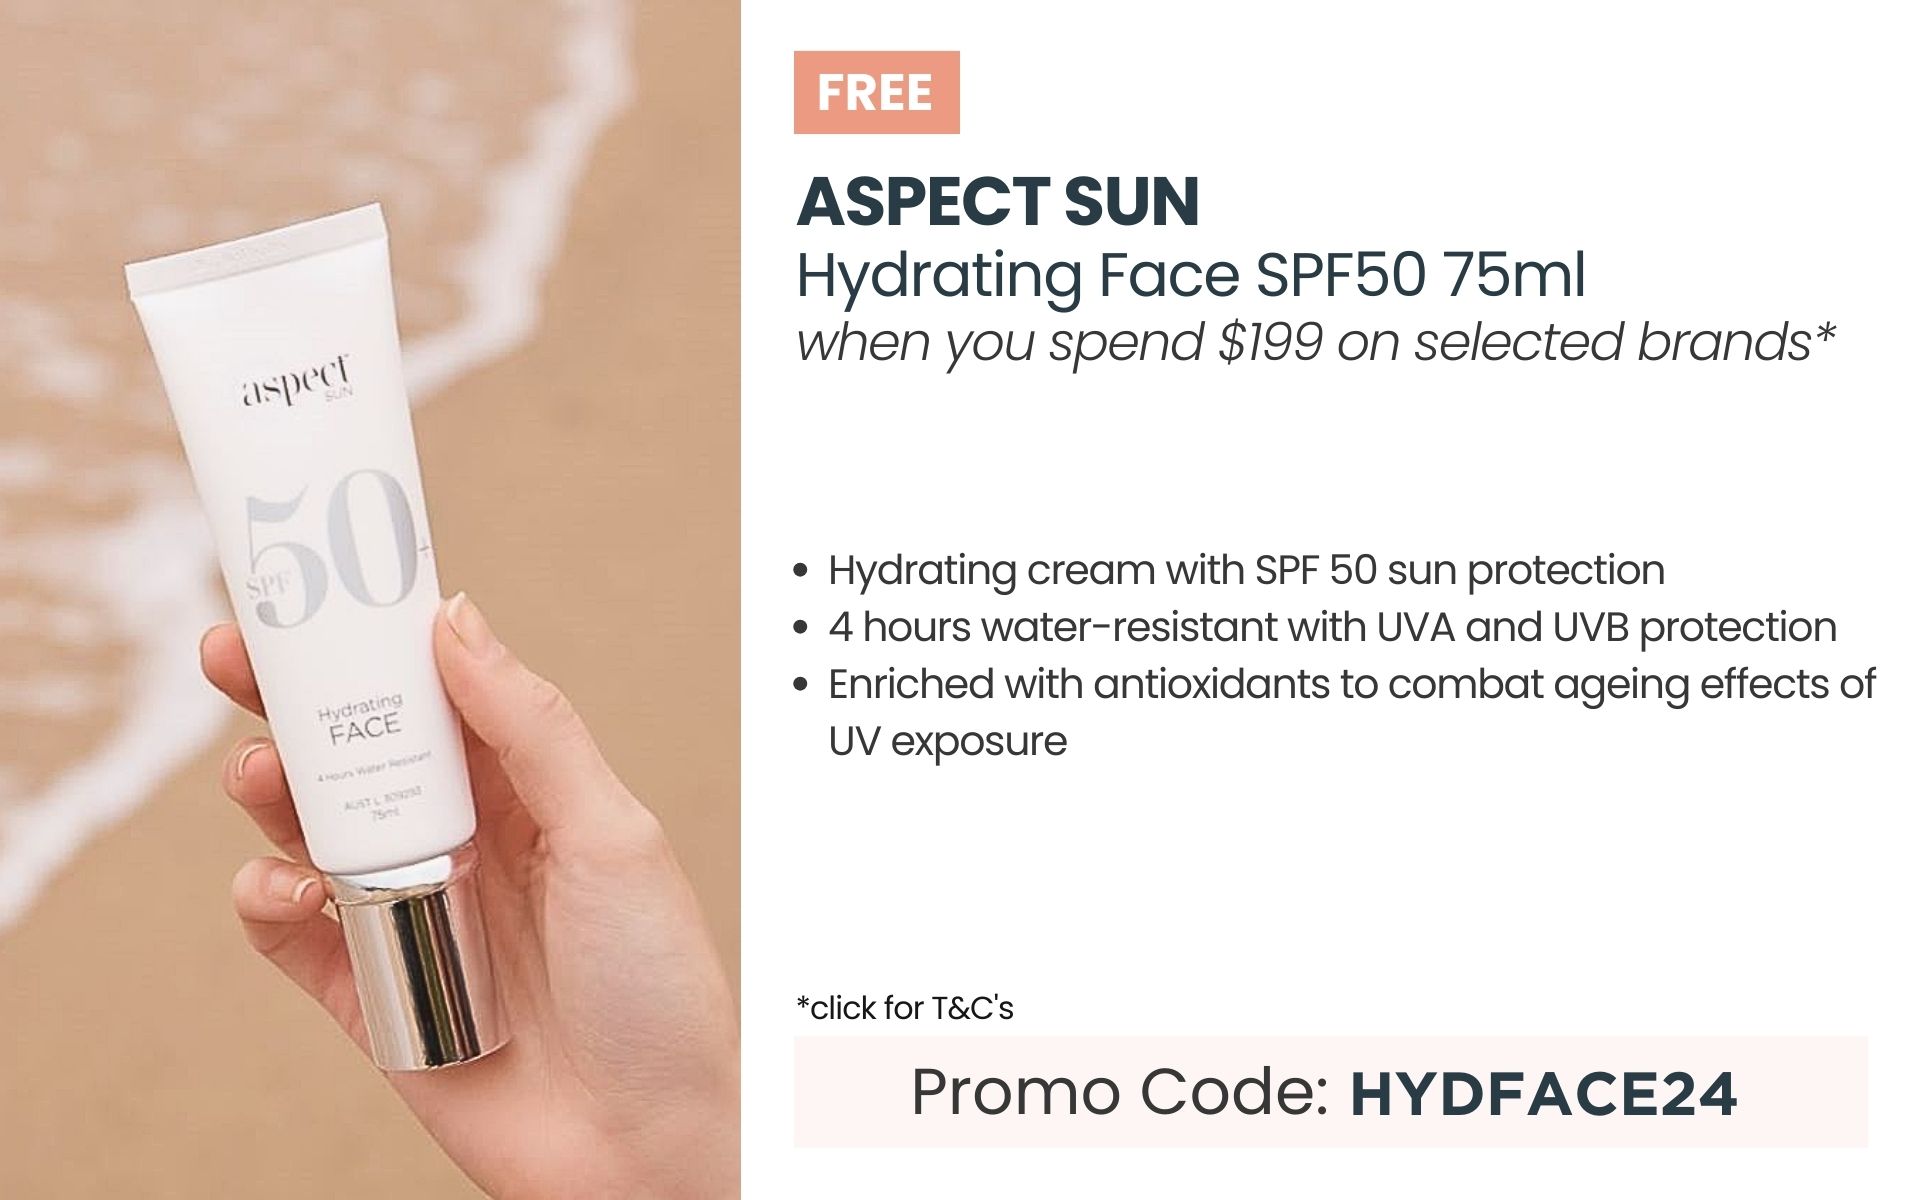 FREE Aspect Sun Hydrating Face SPF50 75ml worth $59 when you spend $199 on selected brands